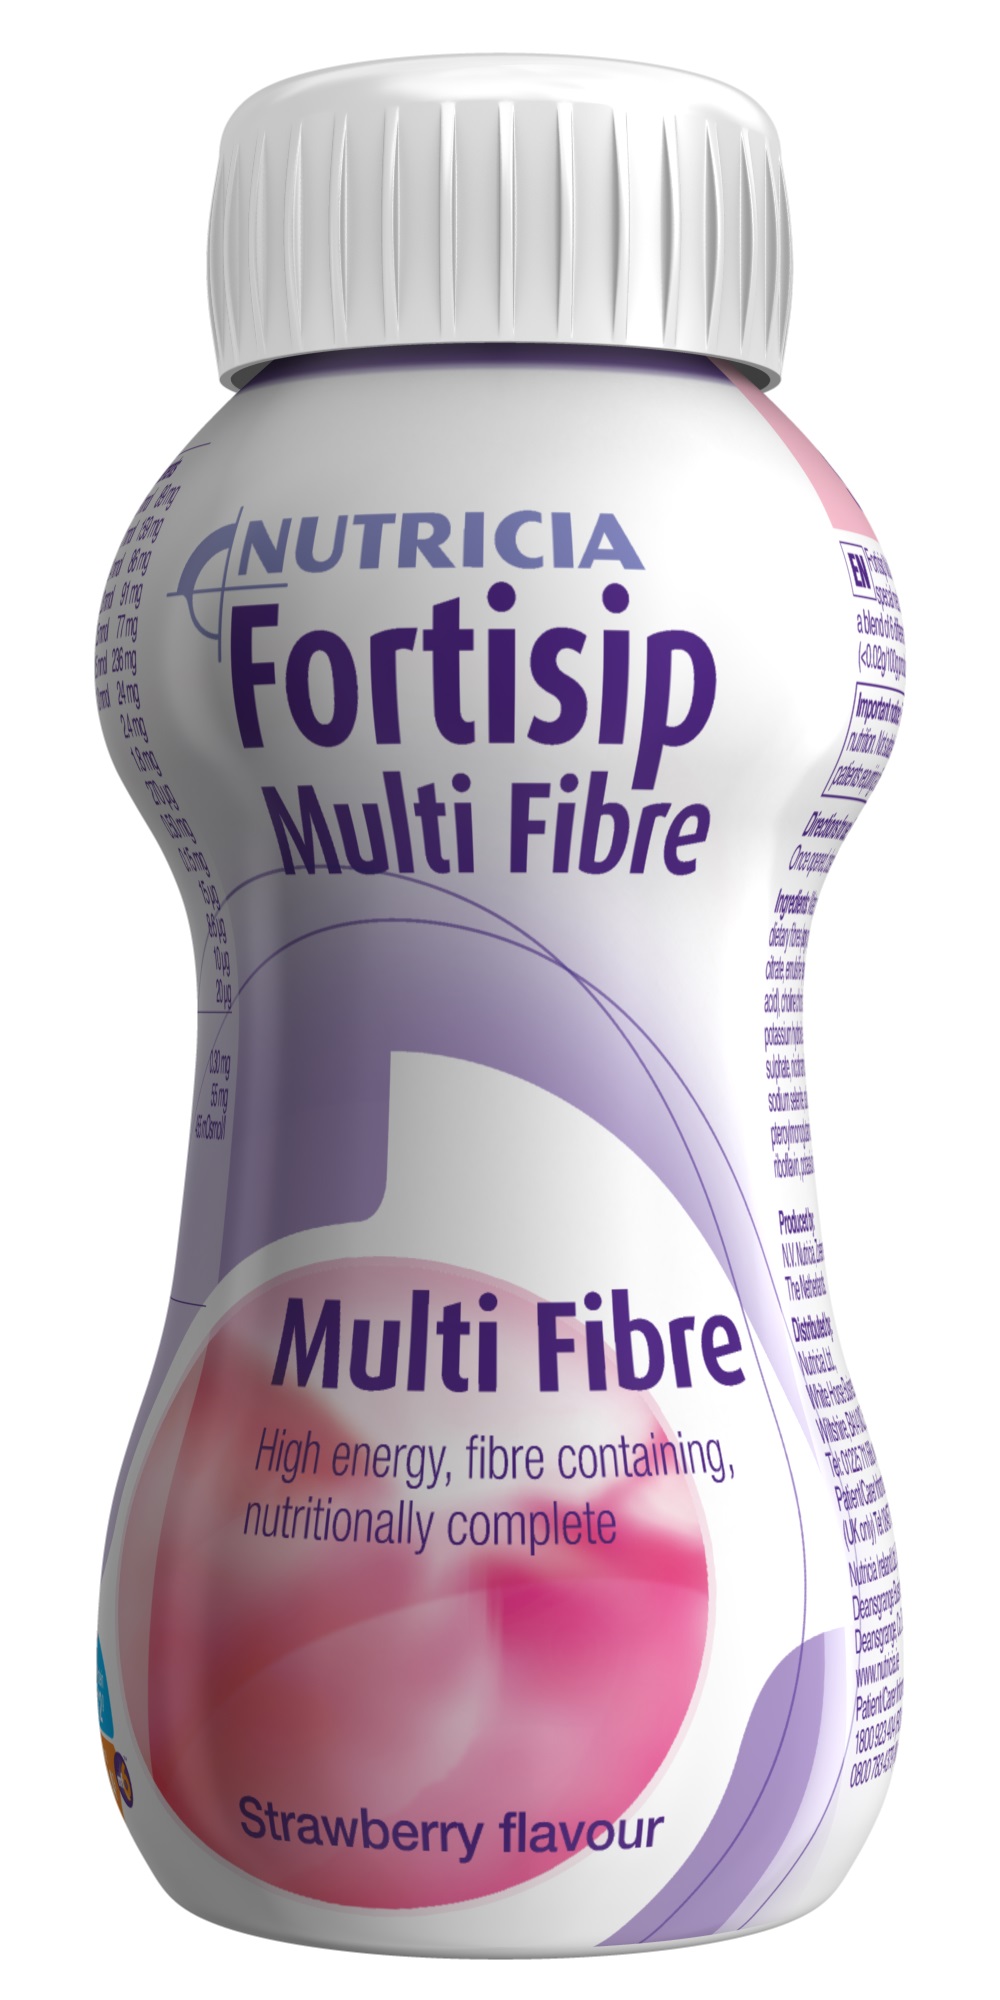 Fortisip Compact Protein